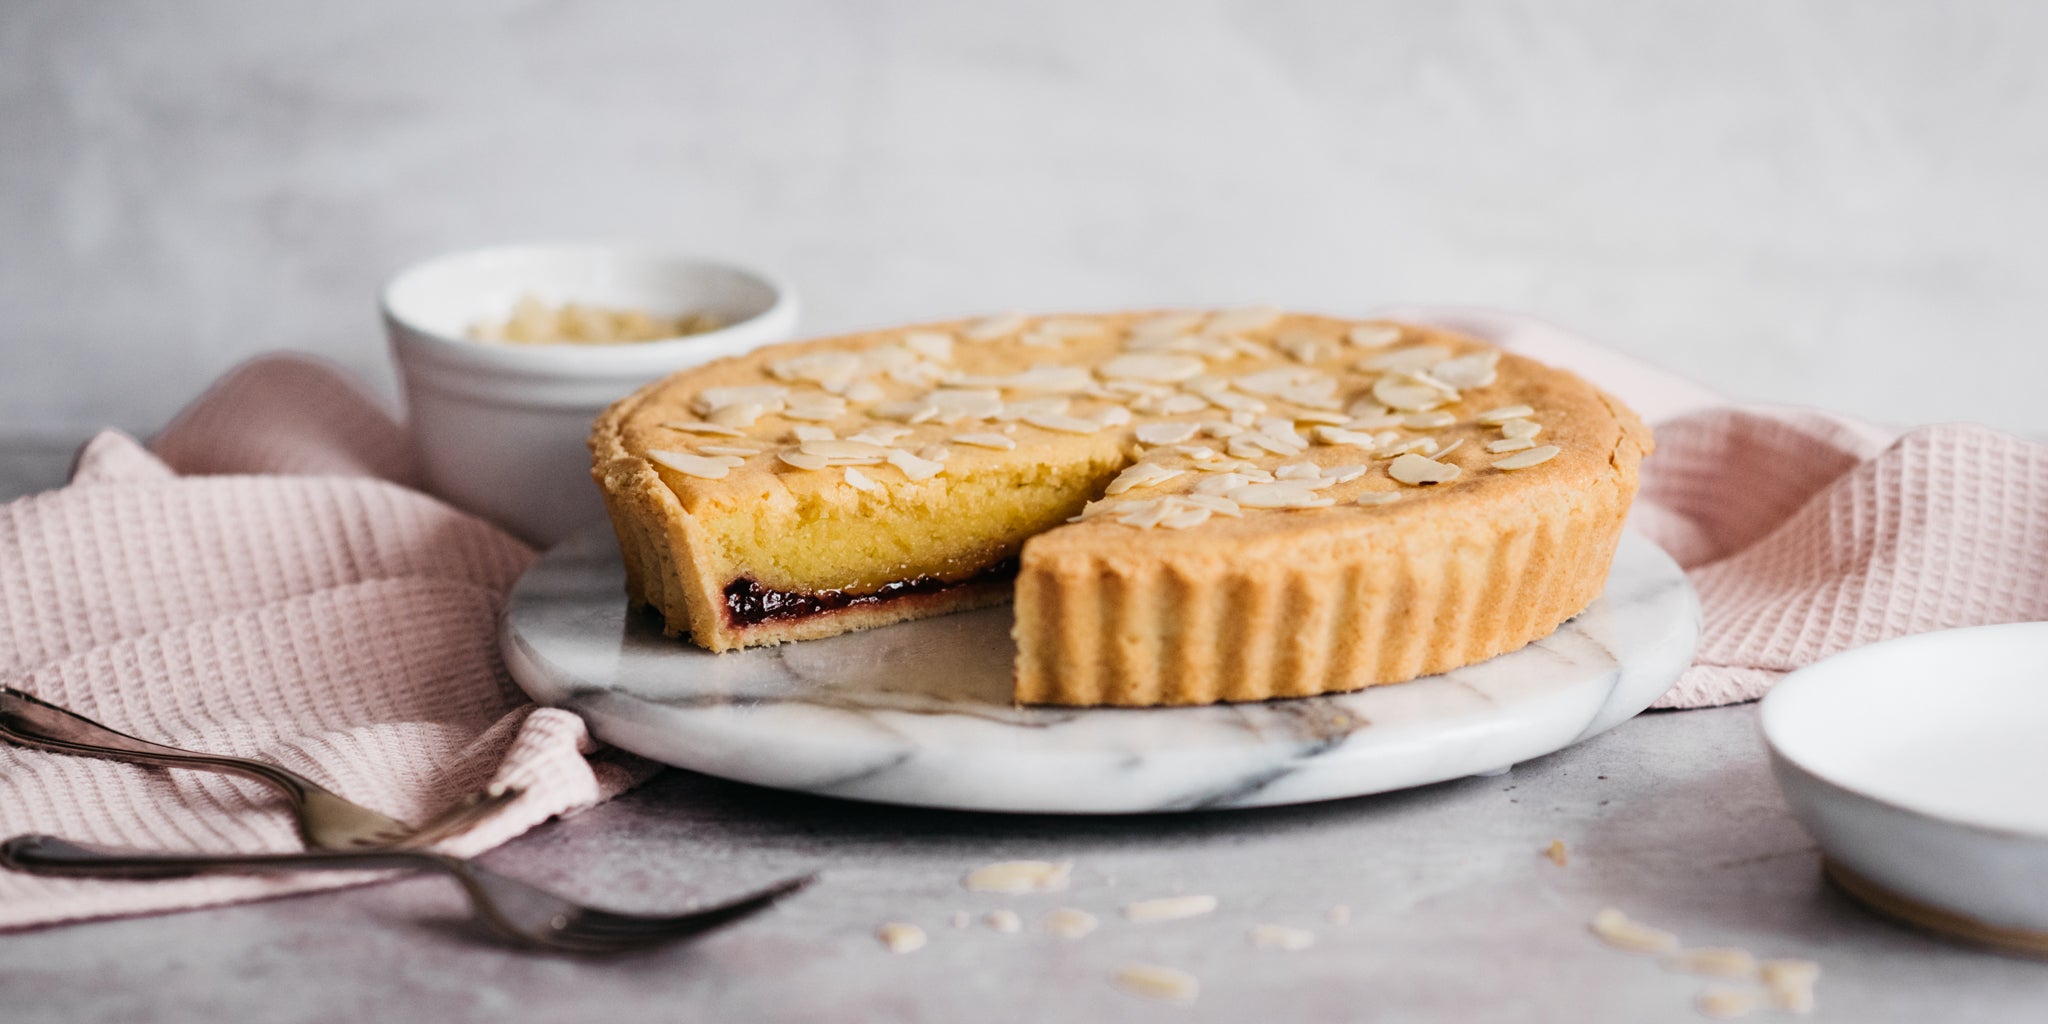 Close up of a slice cut out of a Simple Bakewell Tart, showing the delicious jammy insides